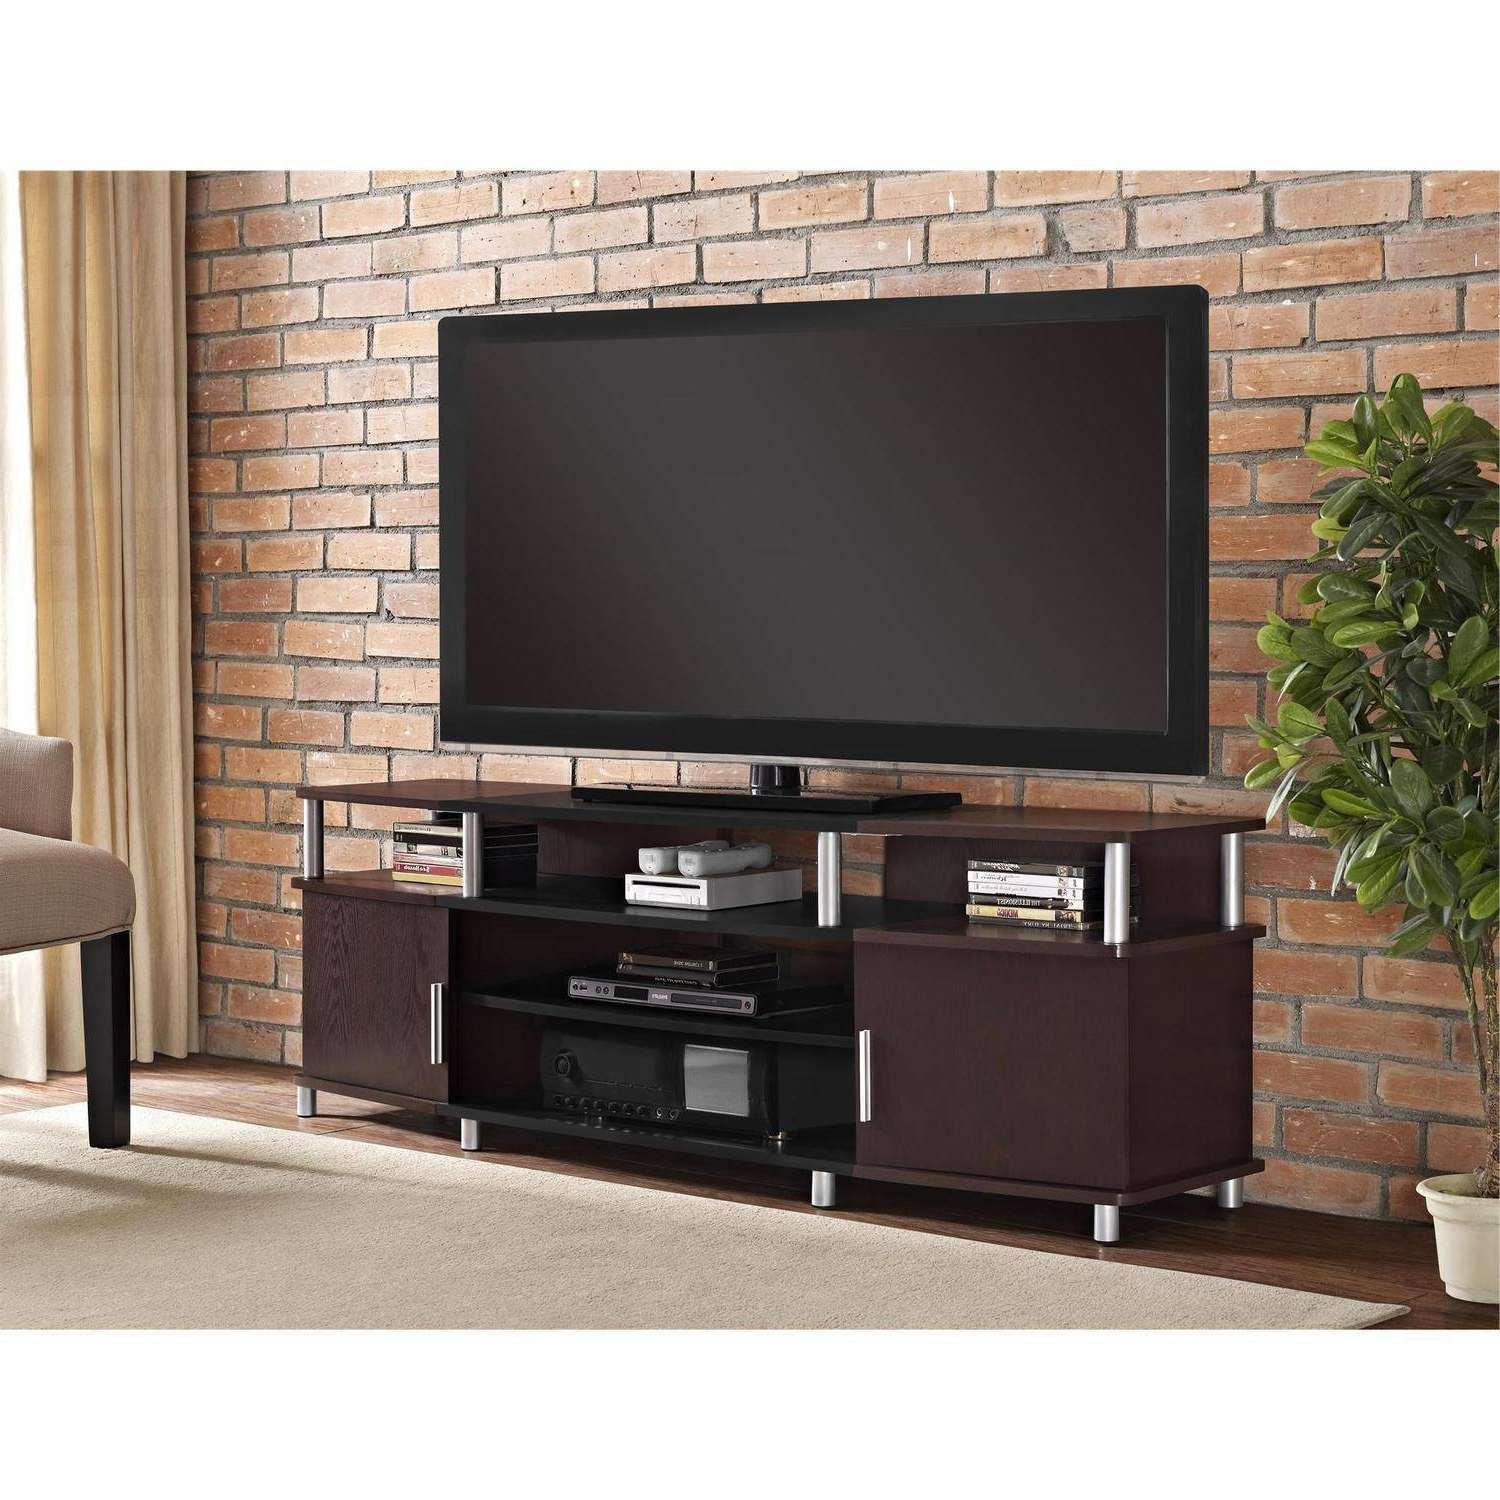 Ameriwood Home Carson Tv Stand For Tvs Up To 70" Wide, Cherry | Ebay Intended For Tv Stands For 70 Inch Tvs (Gallery 1 of 15)